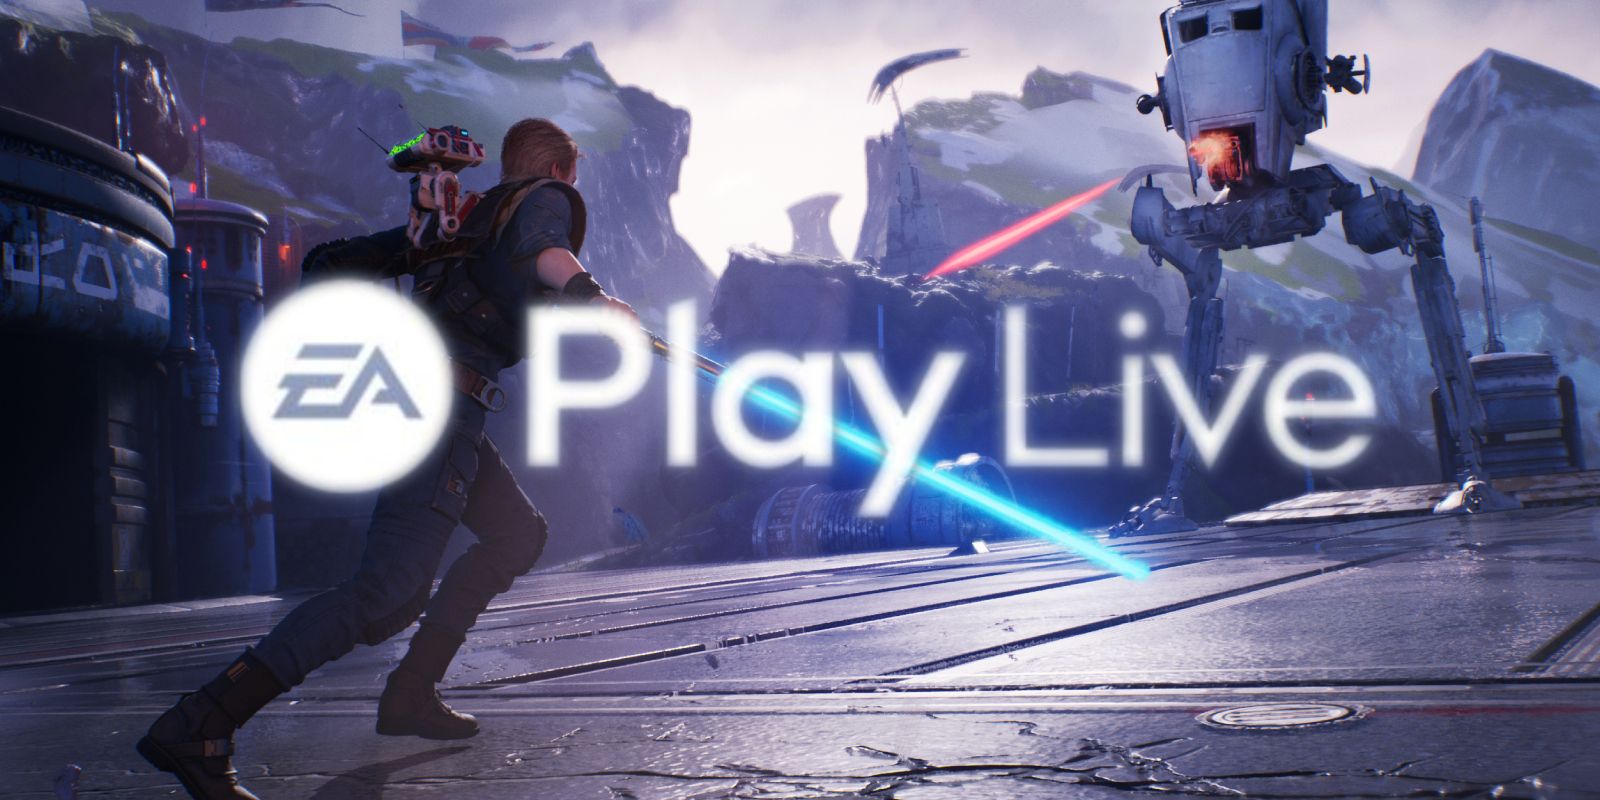 Why Jedi Fallen Order 2 Will Likely Be At EA Play Live